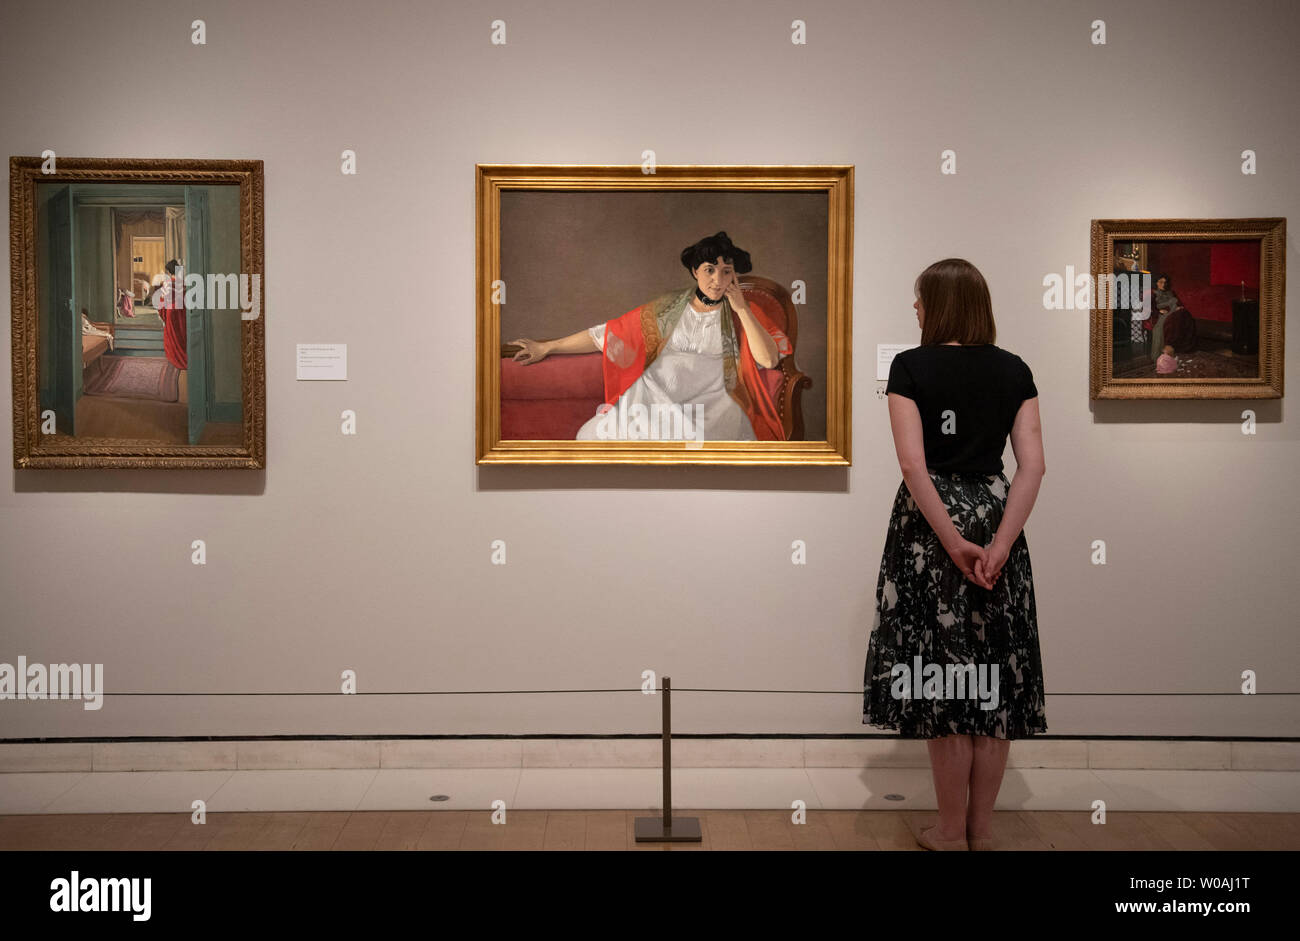 Royal Academy of Arts, London, UK. 27th June 2019. Felix Vallotton: Painter of Disquiet. The first exhibition of the artist Felix Vallotton’s work in the UK since 1976 and the first to include his paintings. Image: (left) Interior with Woman in Red (Intérieur avec femme en rouge de dos), 1903. Oil on canvas. 92.5 x 70.5 cm. Kunsthaus Zürich; (right) Gabrielle Vallotton, 1905. Musée des Beaux-Arts, Bordeaux. Credit: Malcolm Park/Alamy Live News. Stock Photo